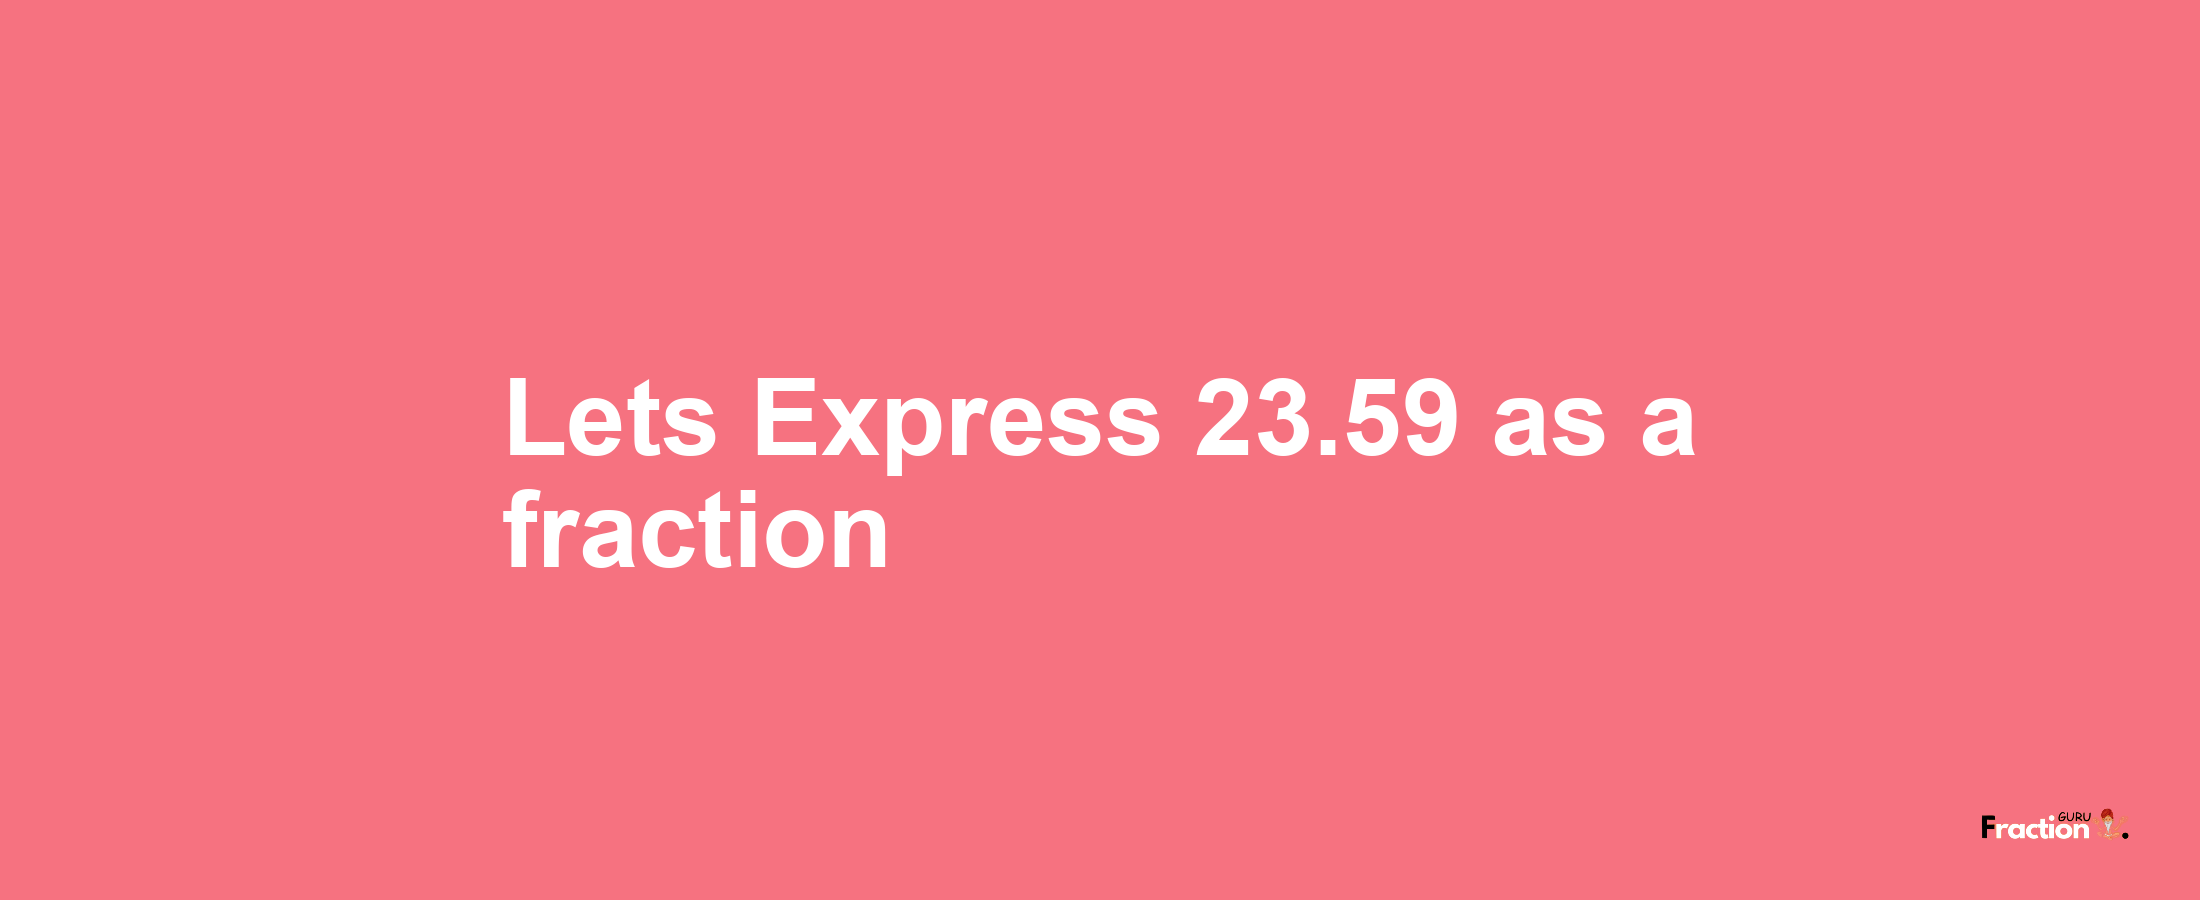 Lets Express 23.59 as afraction